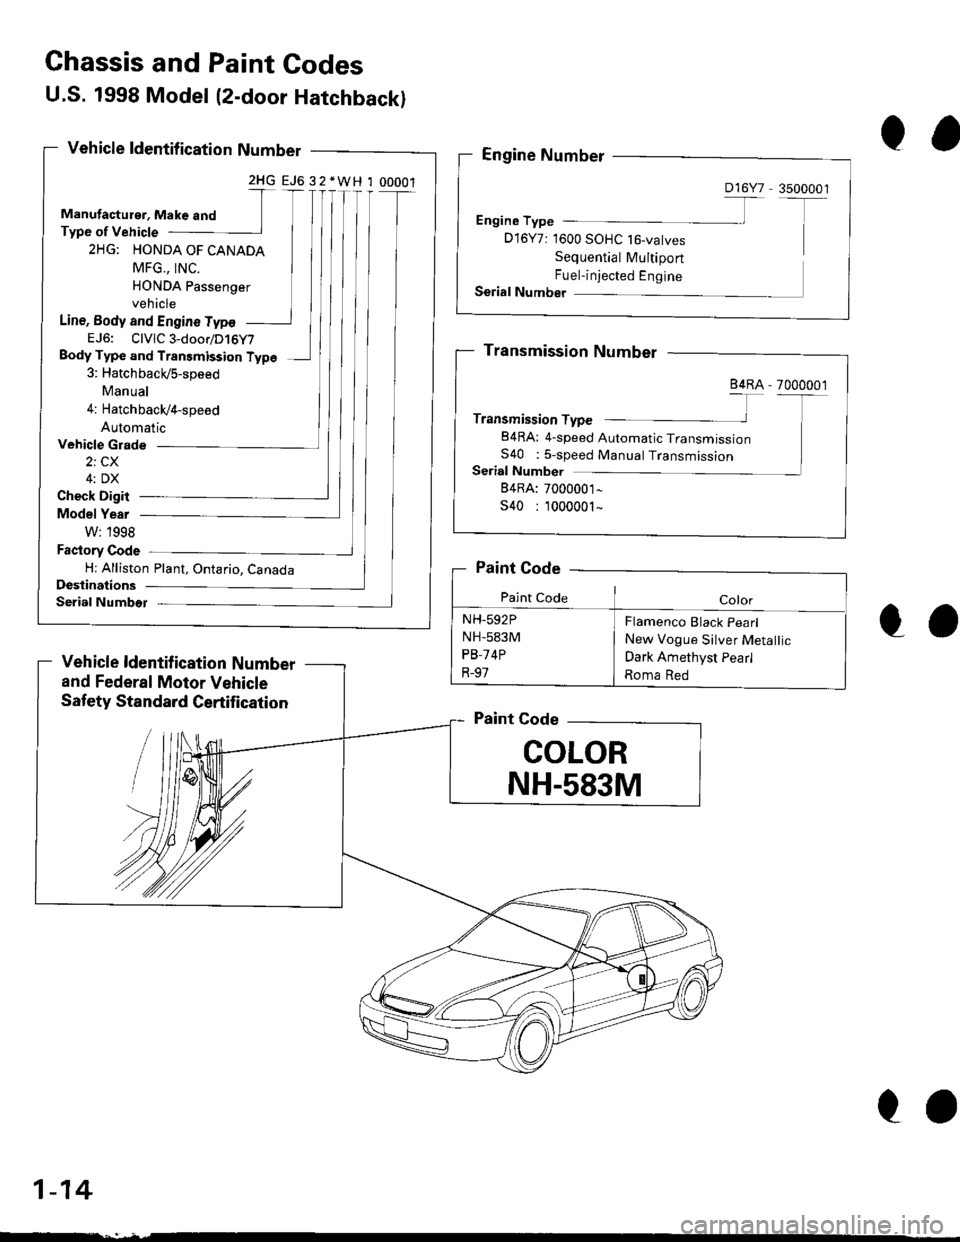 HONDA CIVIC 1999 6.G Workshop Manual Ghassis and Paint Godes
Vehicle Grade
2i CX
4: DX
Check Digit
Model Year
W: 1998
Factory Code
Hr Alliston Plant, Ontario, CanadaDeslinations
Serial Numbet
Vehicle ldentif ication Number
and Federal Mo